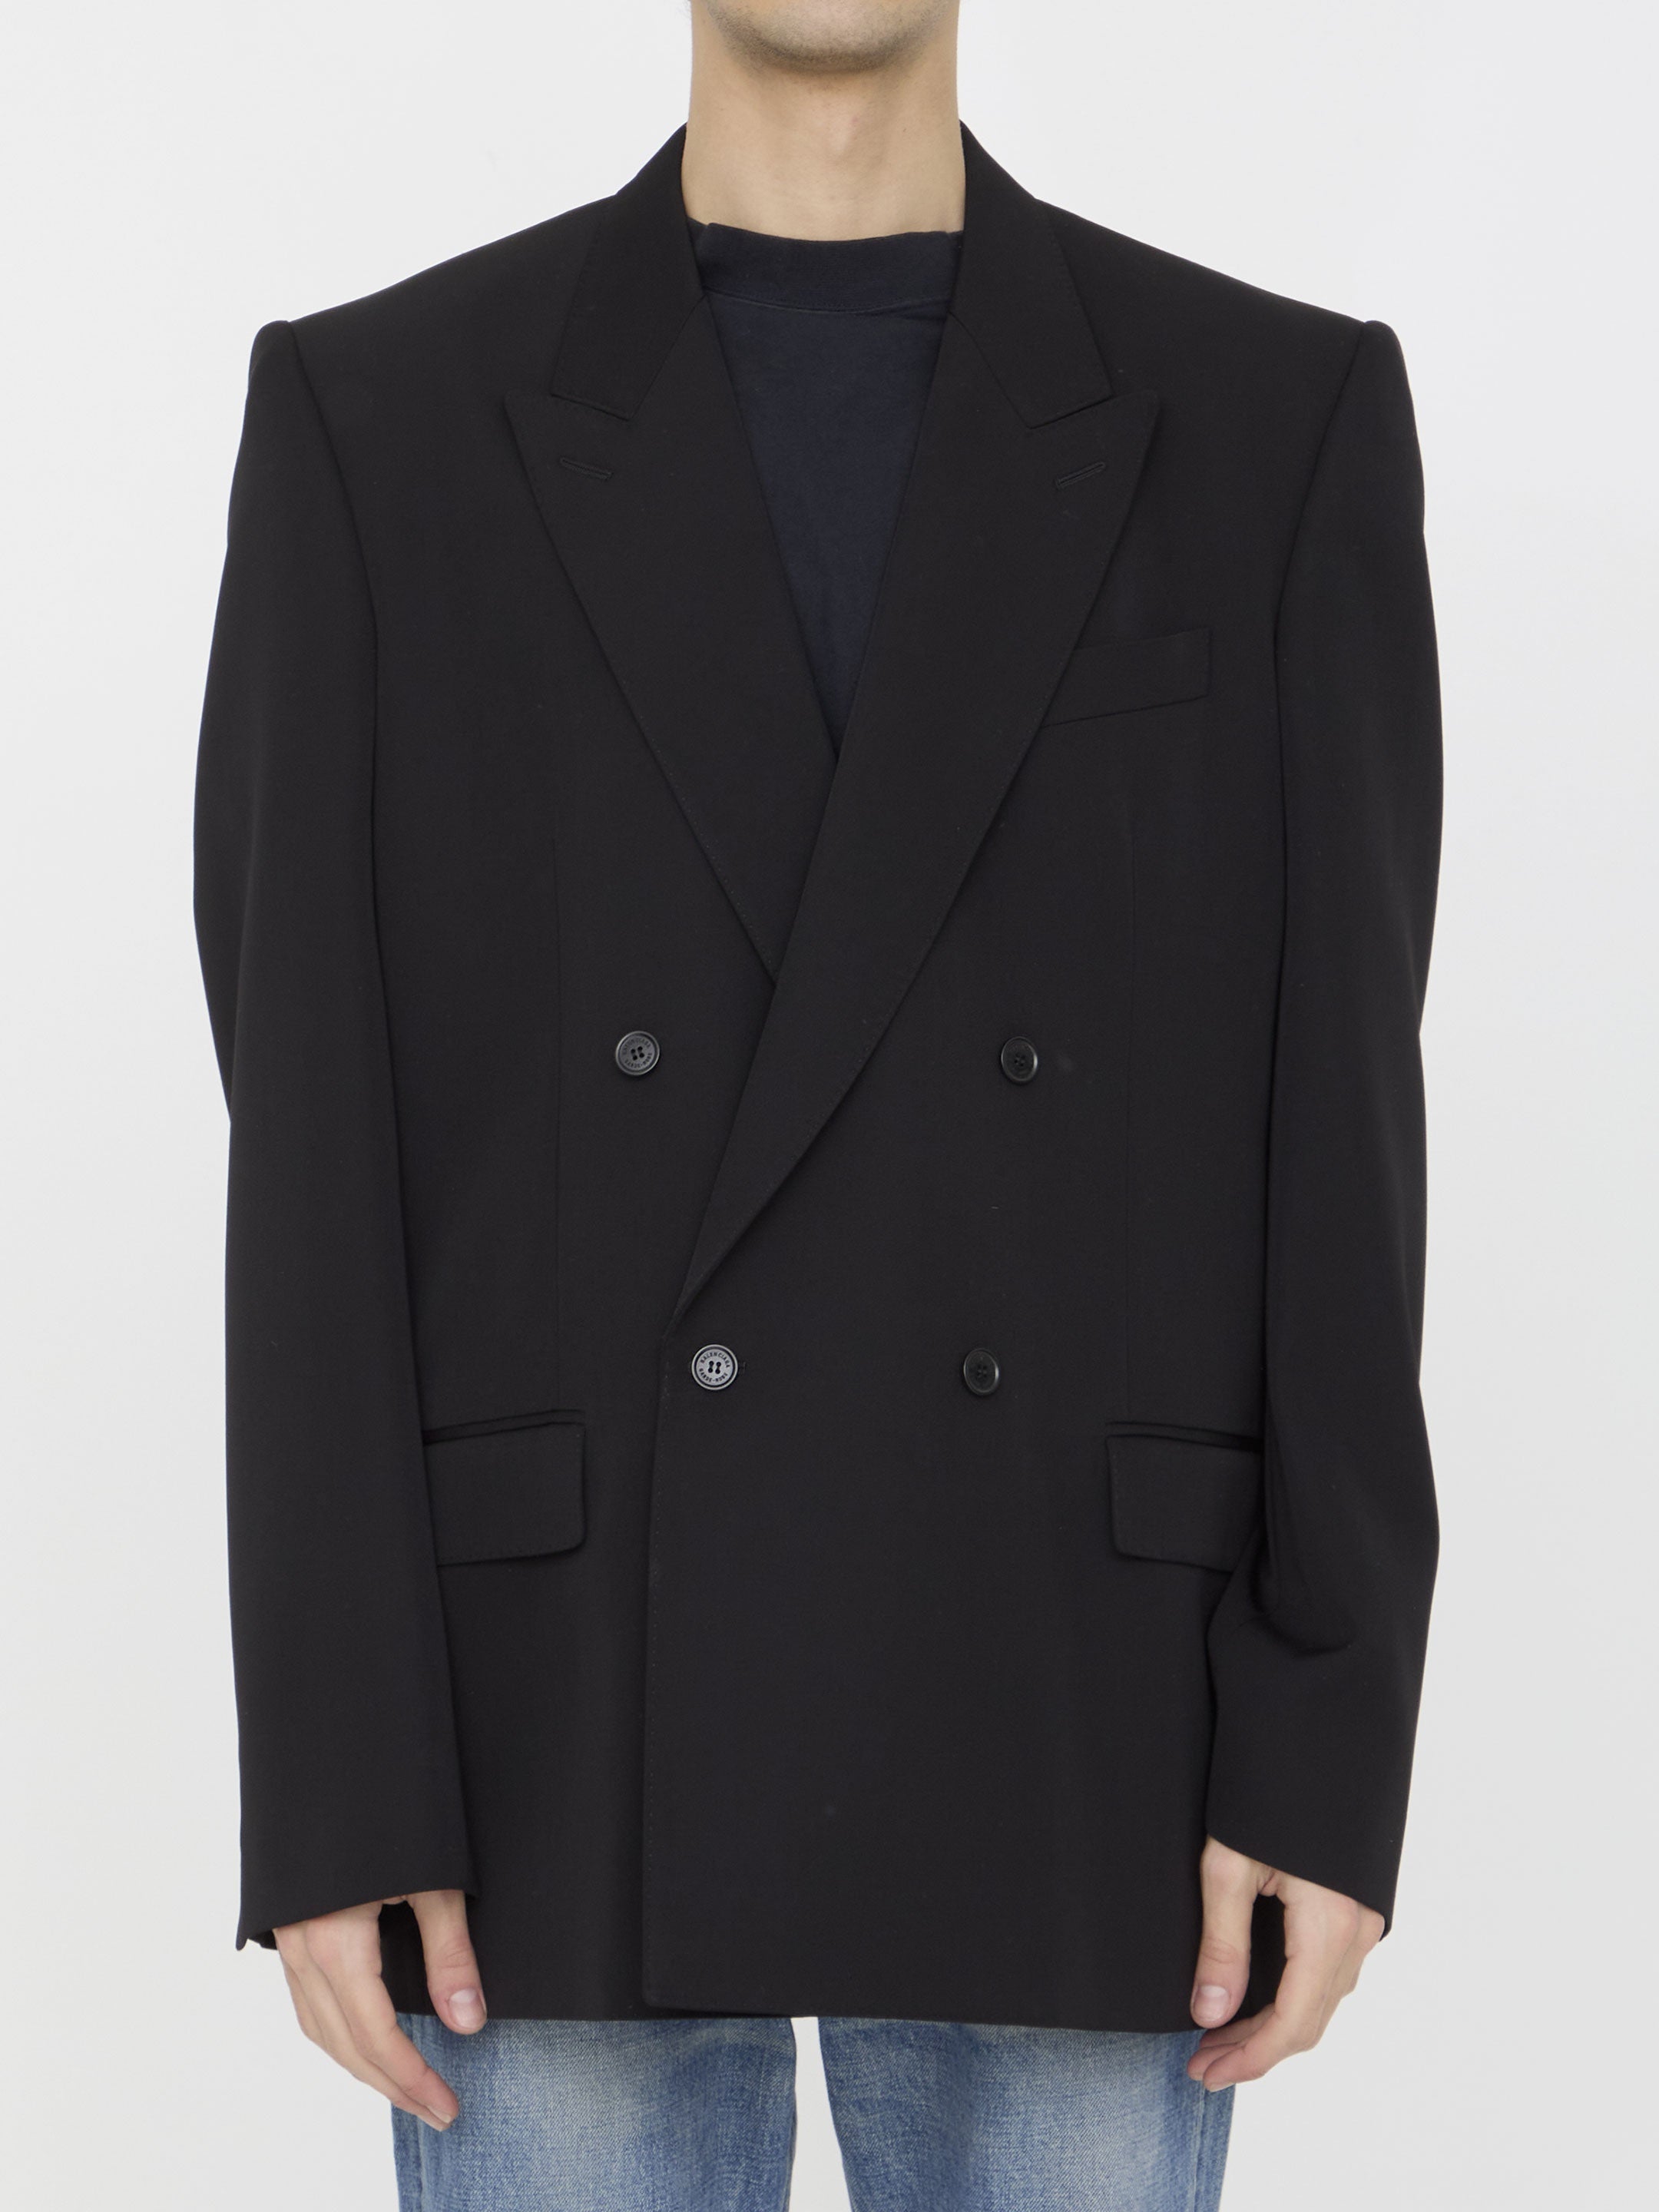 BALENCIAGA-OUTLET-SALE-Oversized-Blazer-CLOTHING-XS-BLACK-ARCHIVE-COLLECTION.jpg